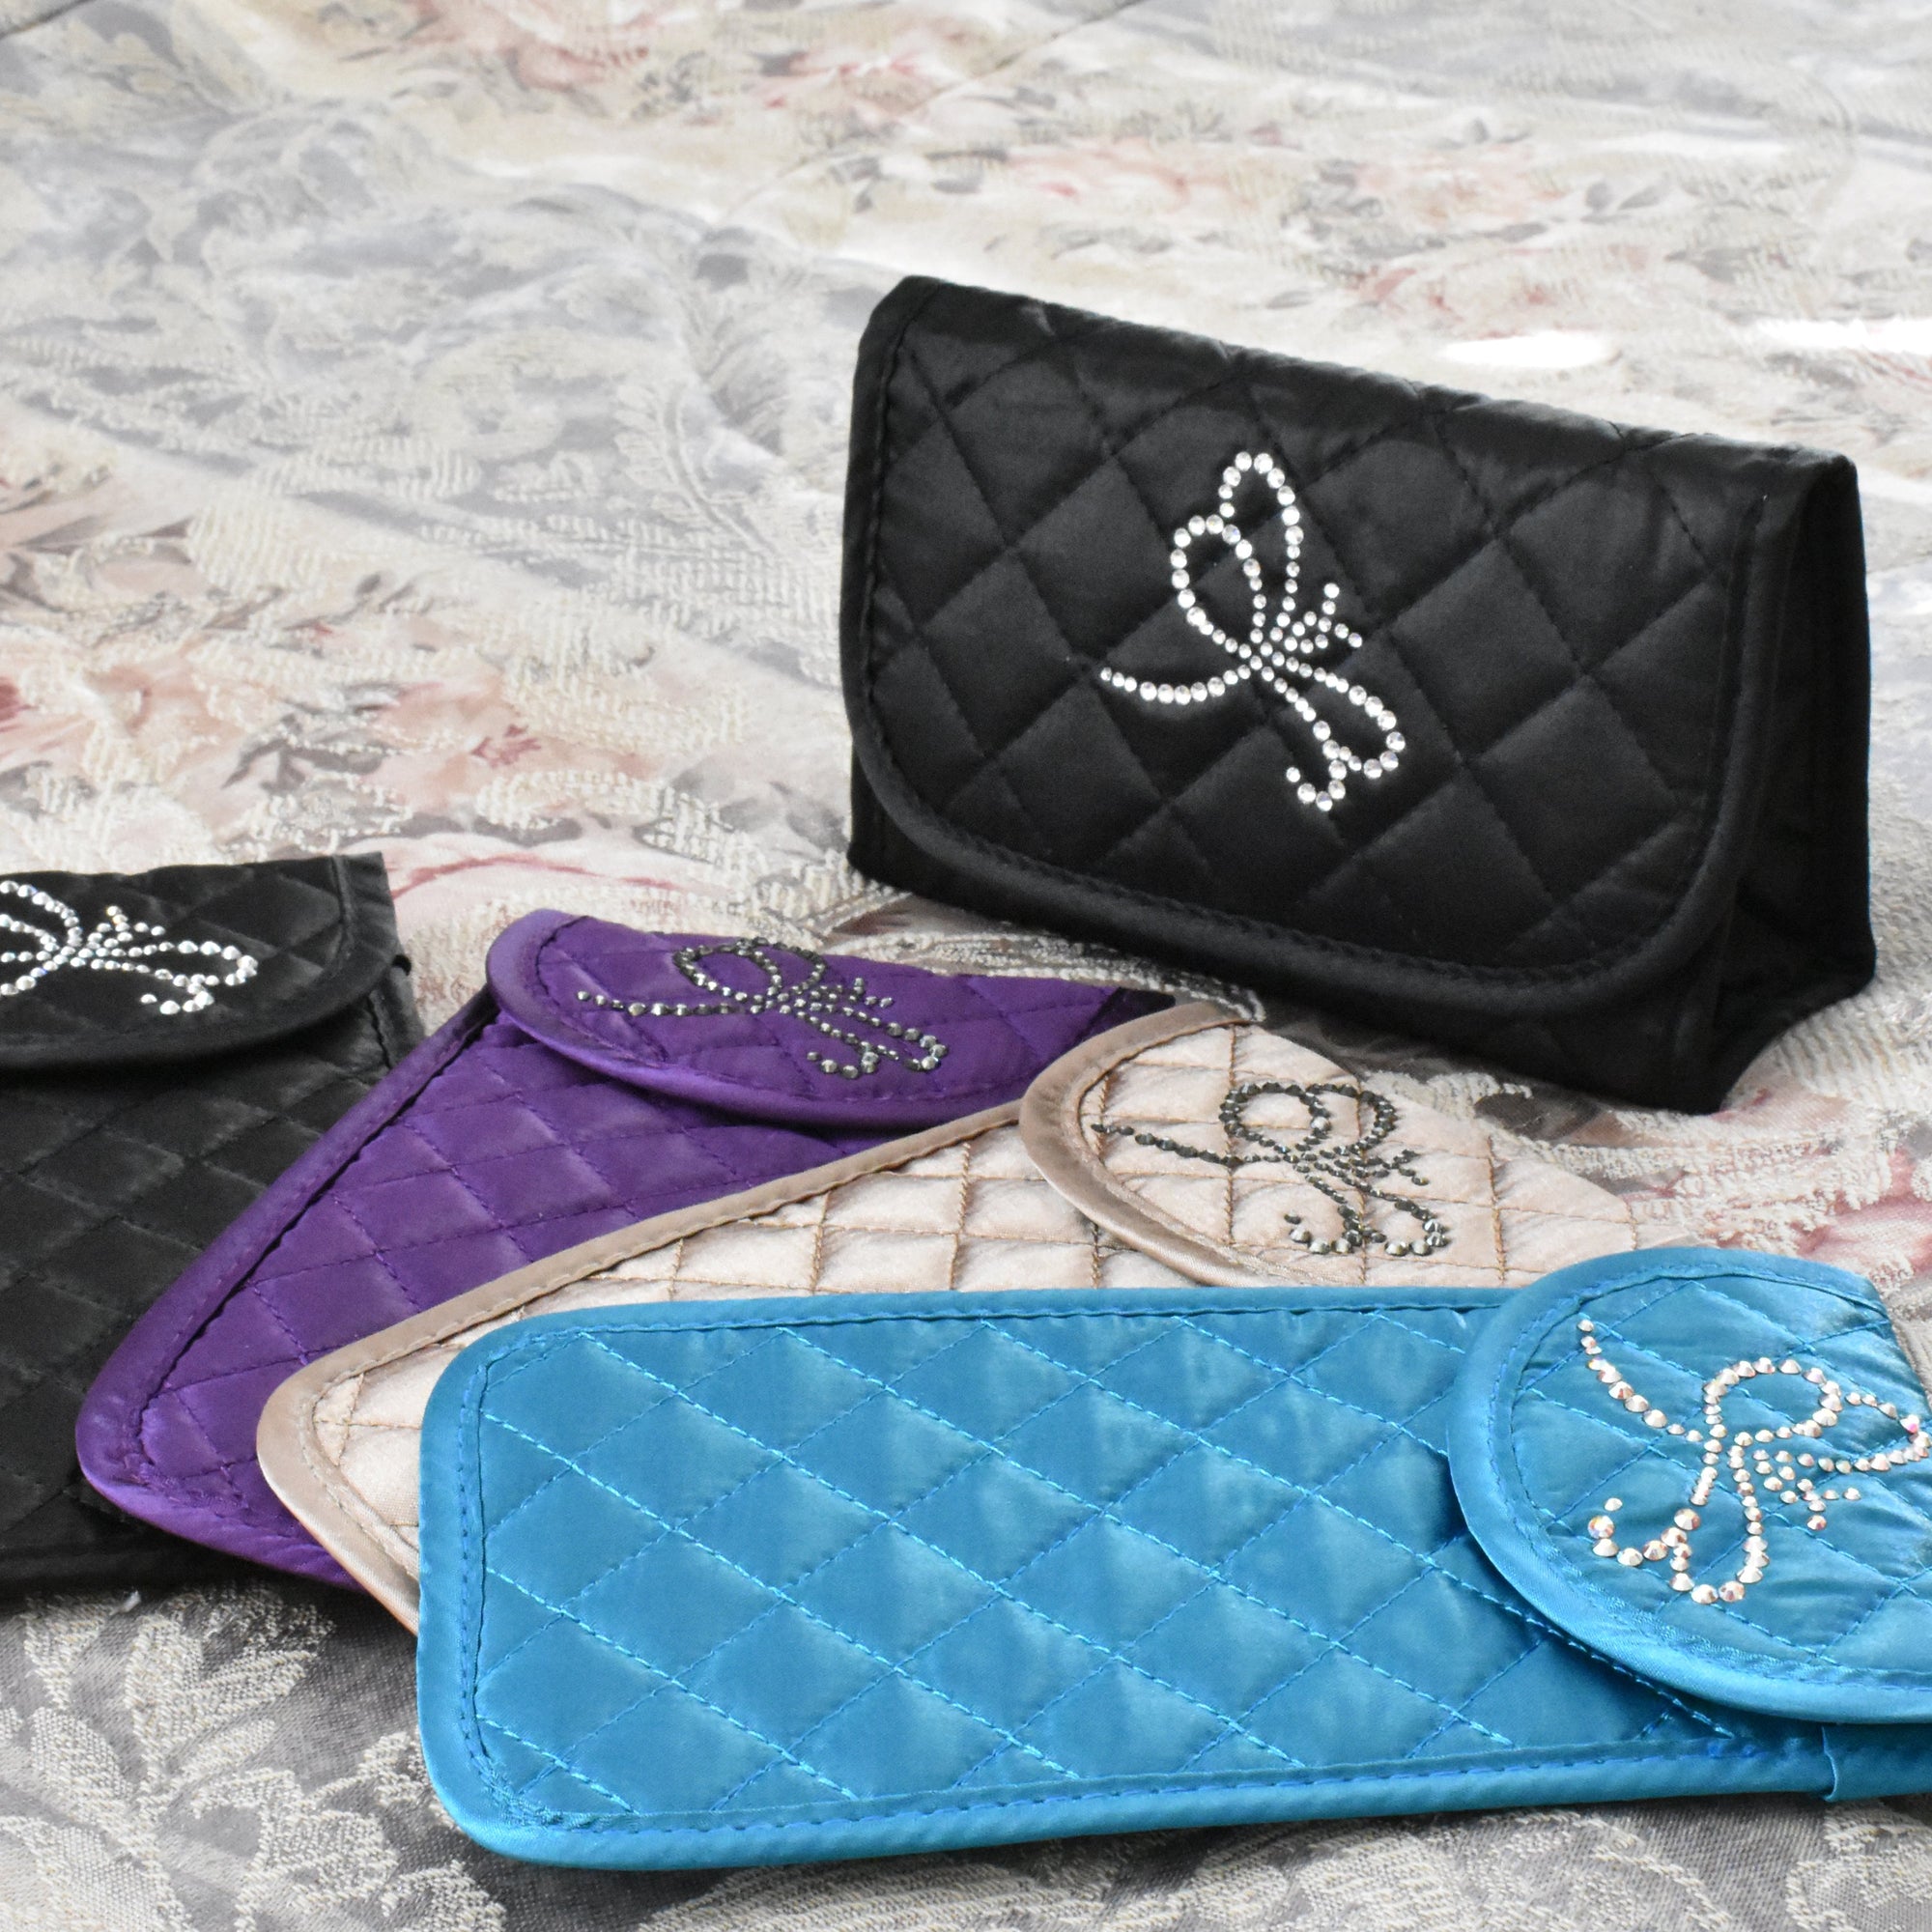 Personalized & Monogrammed Accessories